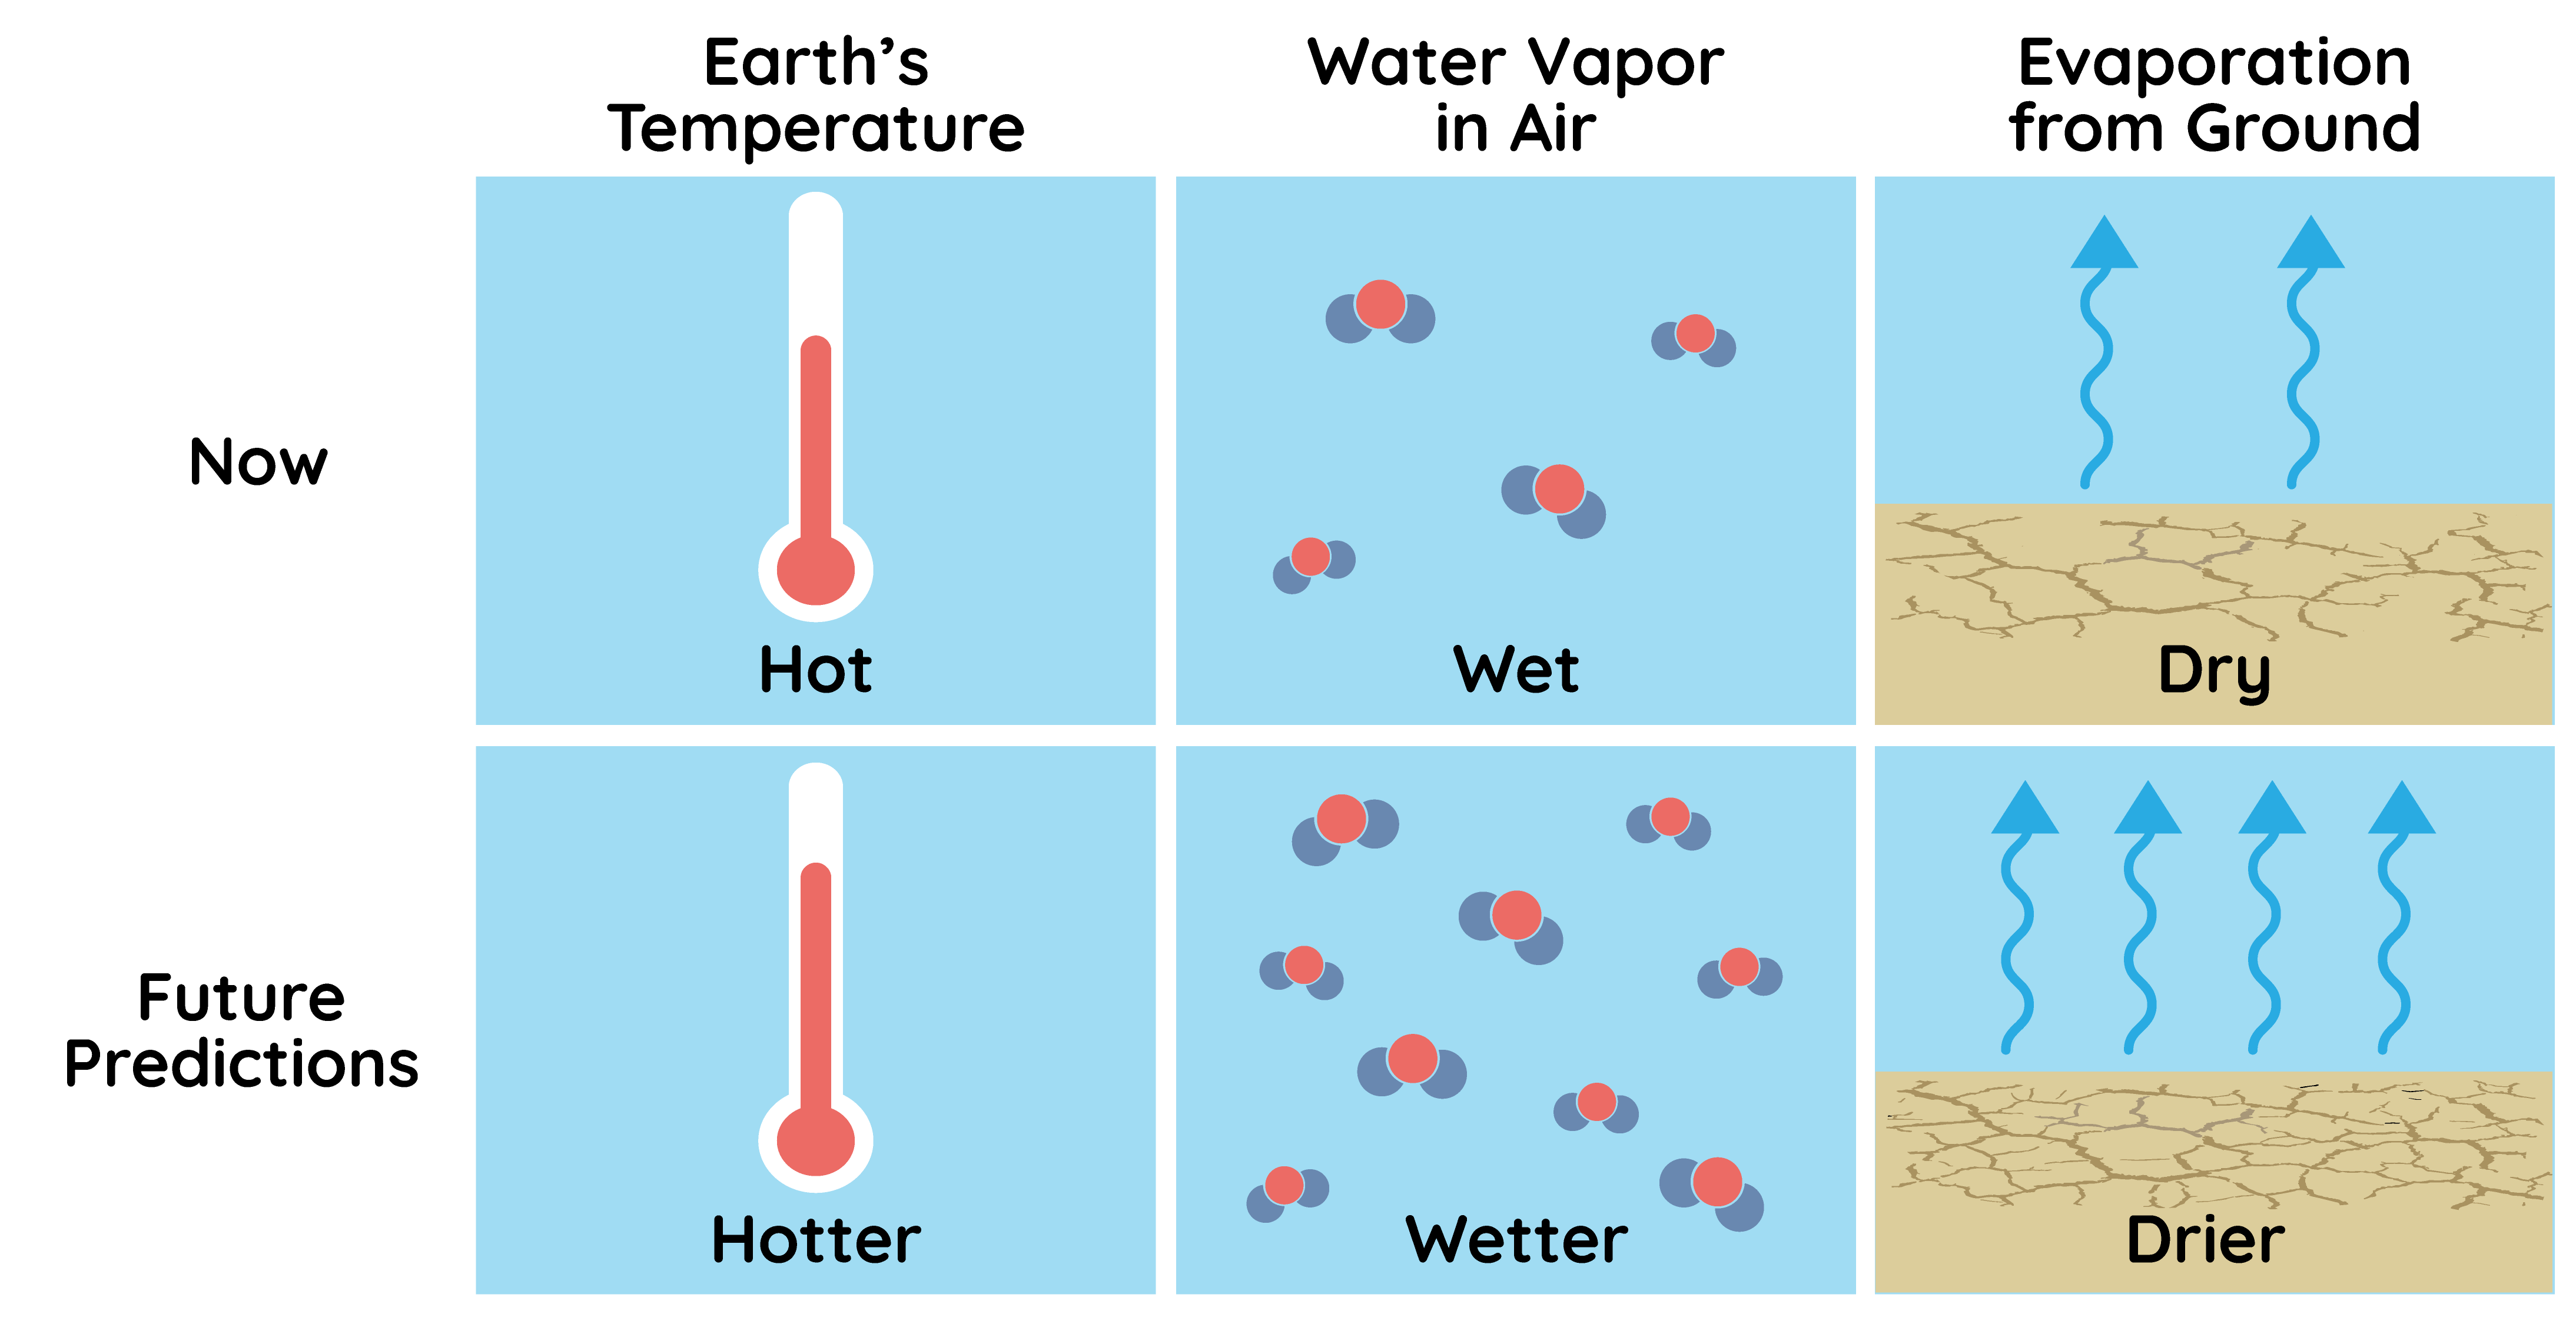 A grid of six boxes is shown with illustrations in each box. On the left, the two rows are labeled 'Now' and 'Future Predictions.' On the top, the columns are labeled 'Earth’s Temperature,' 'Water Vapor in Air,' and 'Evaporation from Ground.' The top left box shows a white thermometer that is filled to about halfway with red surrounded by a blue background. It is labeled 'Hot.' Below that is a box with the same illustration except the red color fills up more of the white thermometer and it is labeled 'Hotter.' The top middle box shows four water molecules that have a red circle with two smaller blue circles next to them and is labeled 'Wet.' The box below it is similar but with nine water molecules and is labeled 'Wetter.' The right top box shows a tan ground with some cracks in it with two light blue wavy arrows rising up from it and is labeled 'Dry.' The bottom right illustration is similar but the ground has more cracks in it and there are now four wavy arrows, and it is labeled 'Drier.'